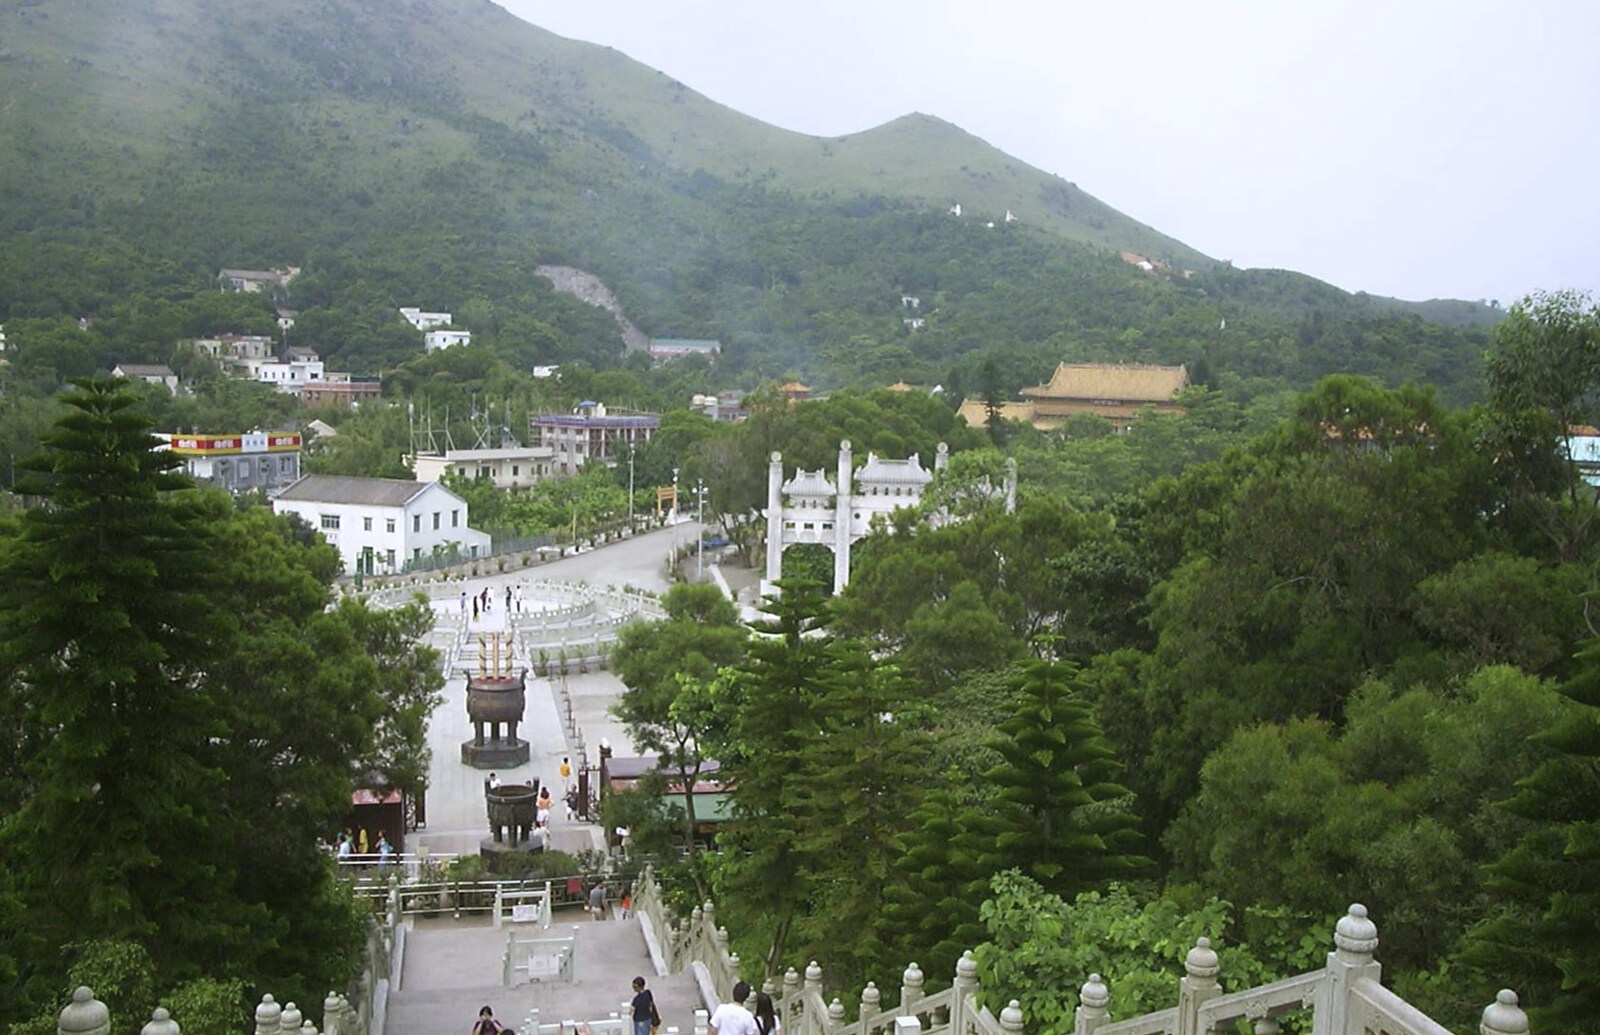 Lantau Island and the Po Lin Monastery, Hong Kong, China - 14th August 2001: The view from the top, overlooking Po Lin